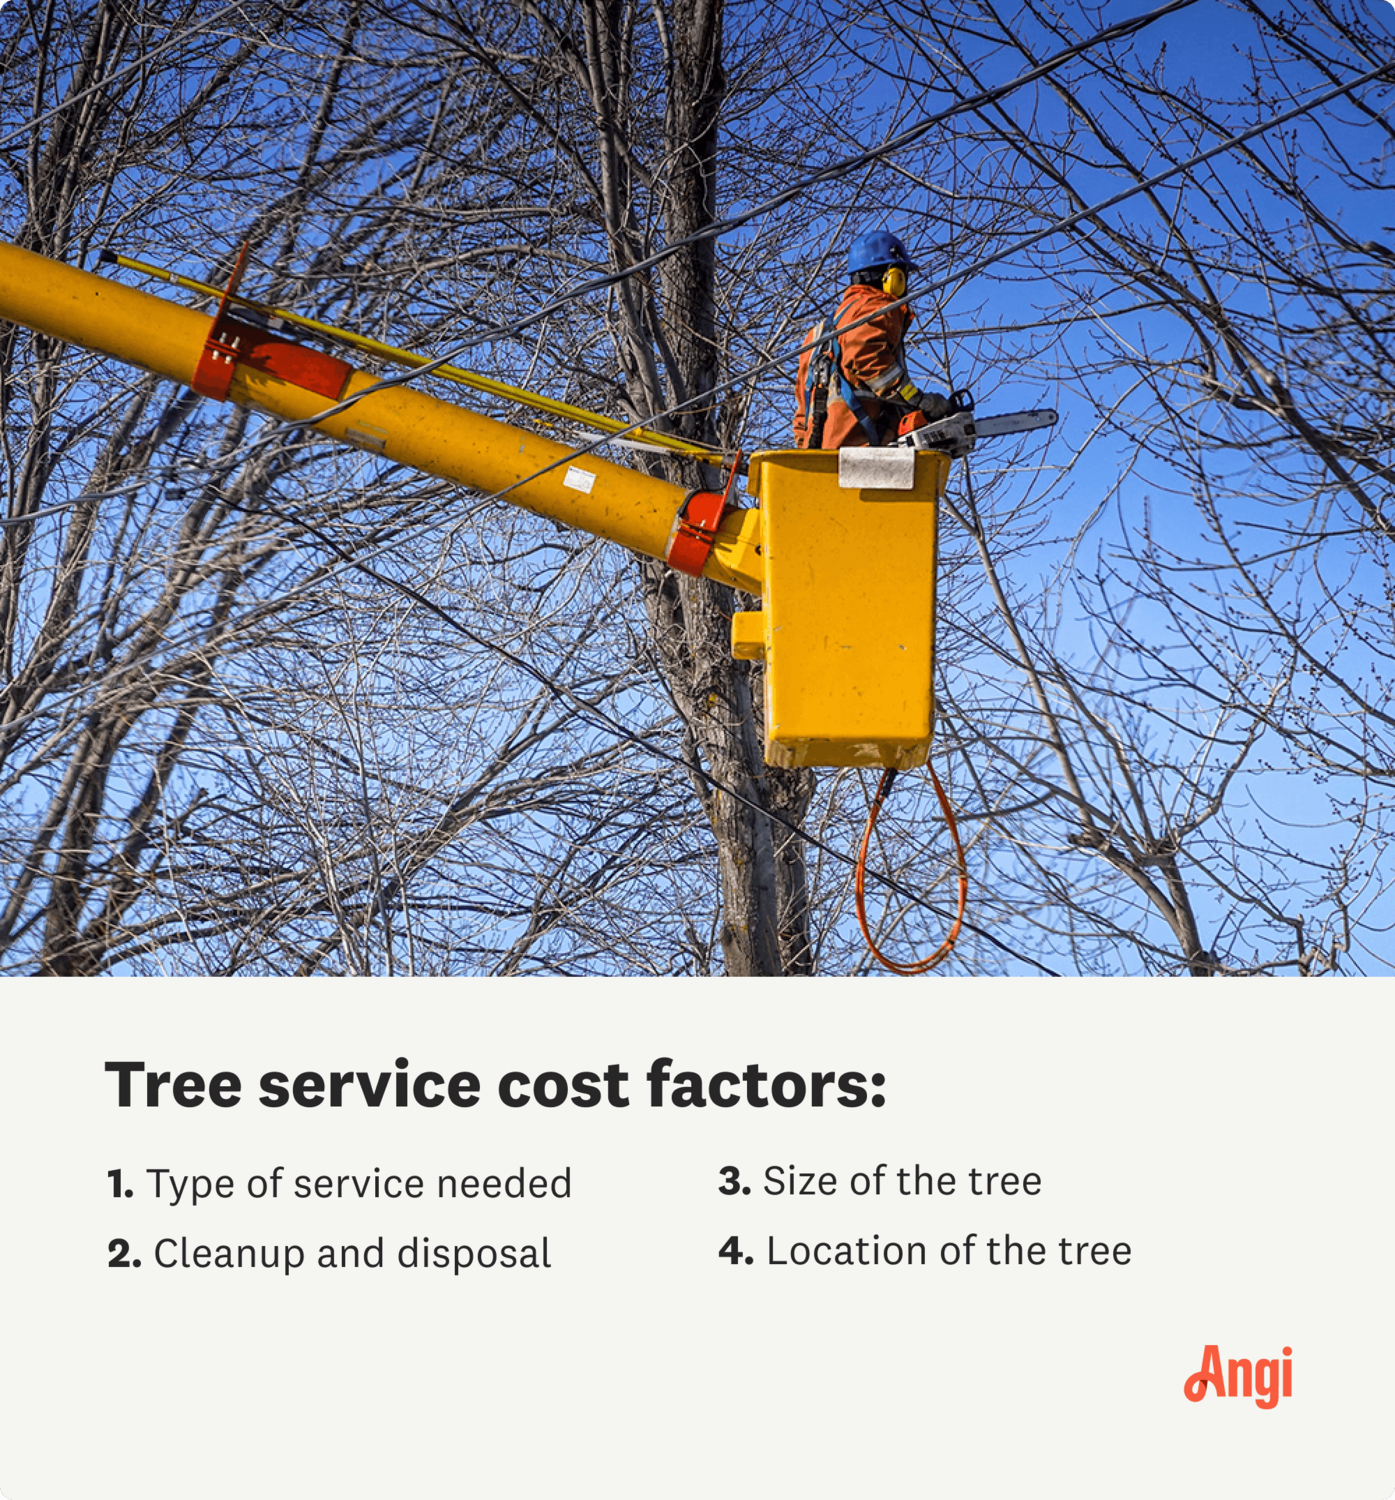 Temecula Tree Service Pros Uses Tree Pruning to Help Homeowner Avoid Spending Thousands of Dollars on Tree Removal 1